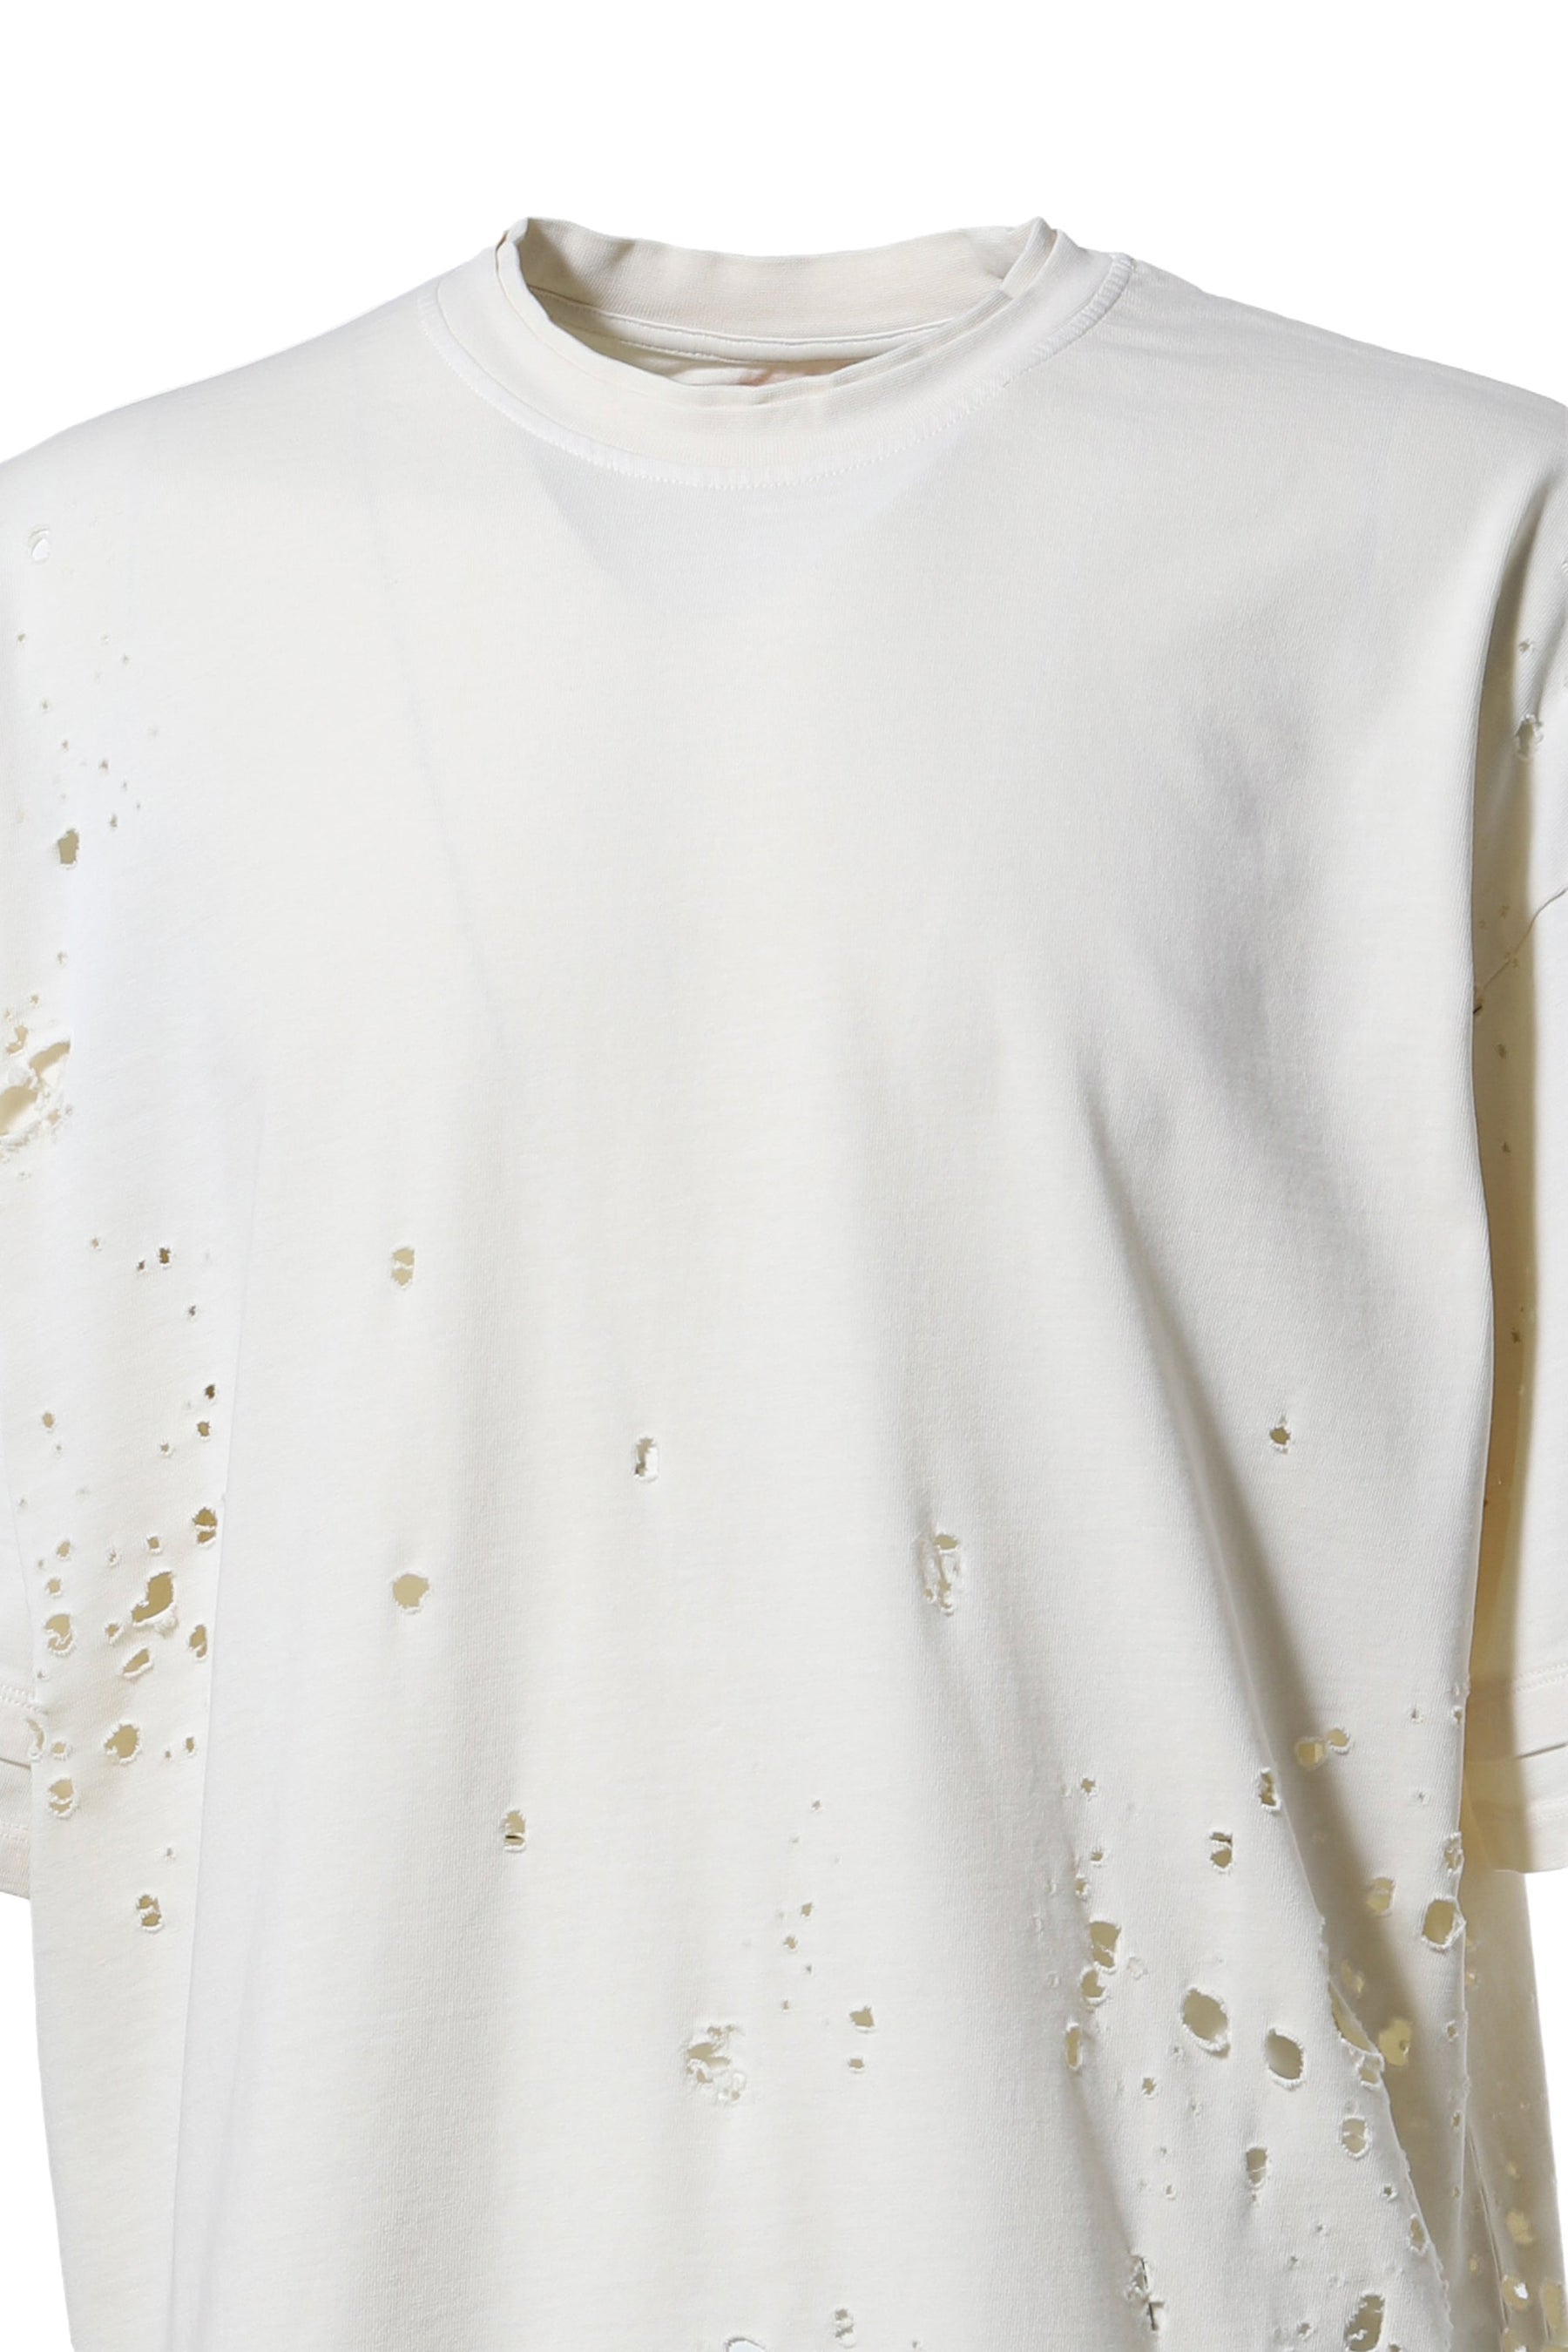 DESTROYED TEE / OFF WHT